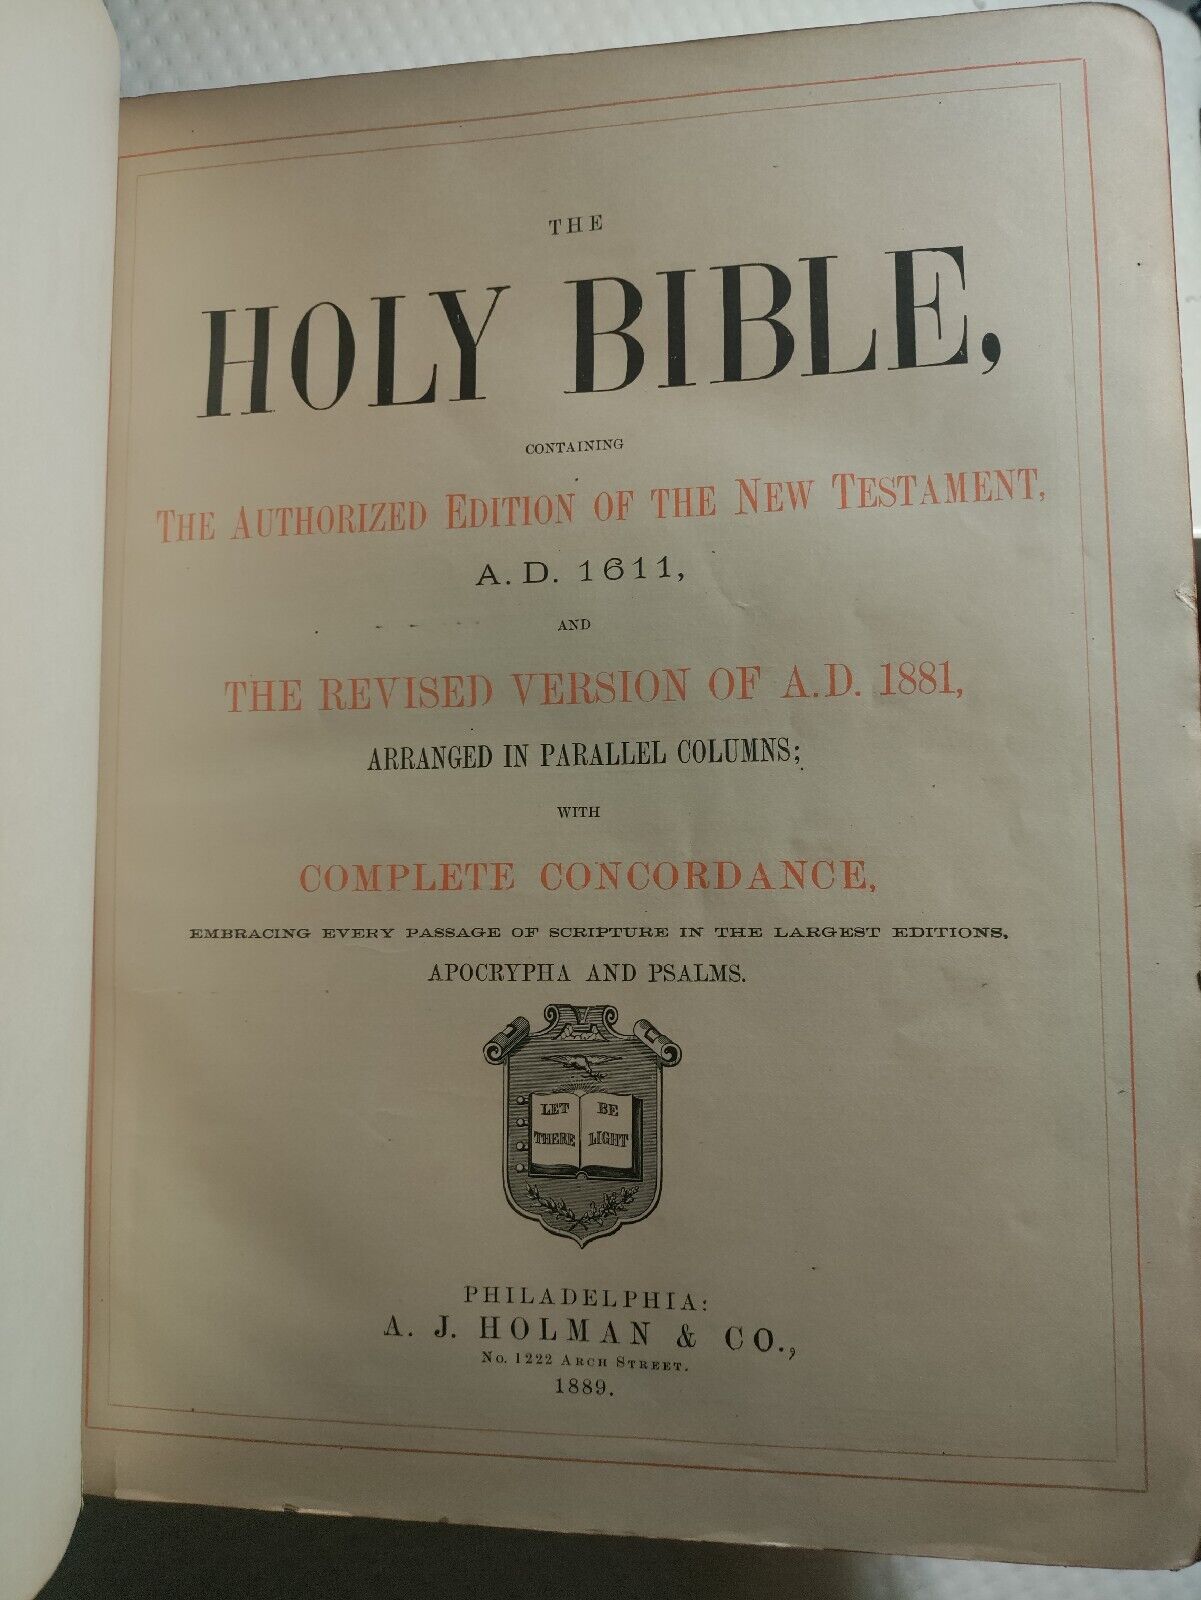  1889The Holy Bible, containing The Authorized Edition of the New Testament, A.D